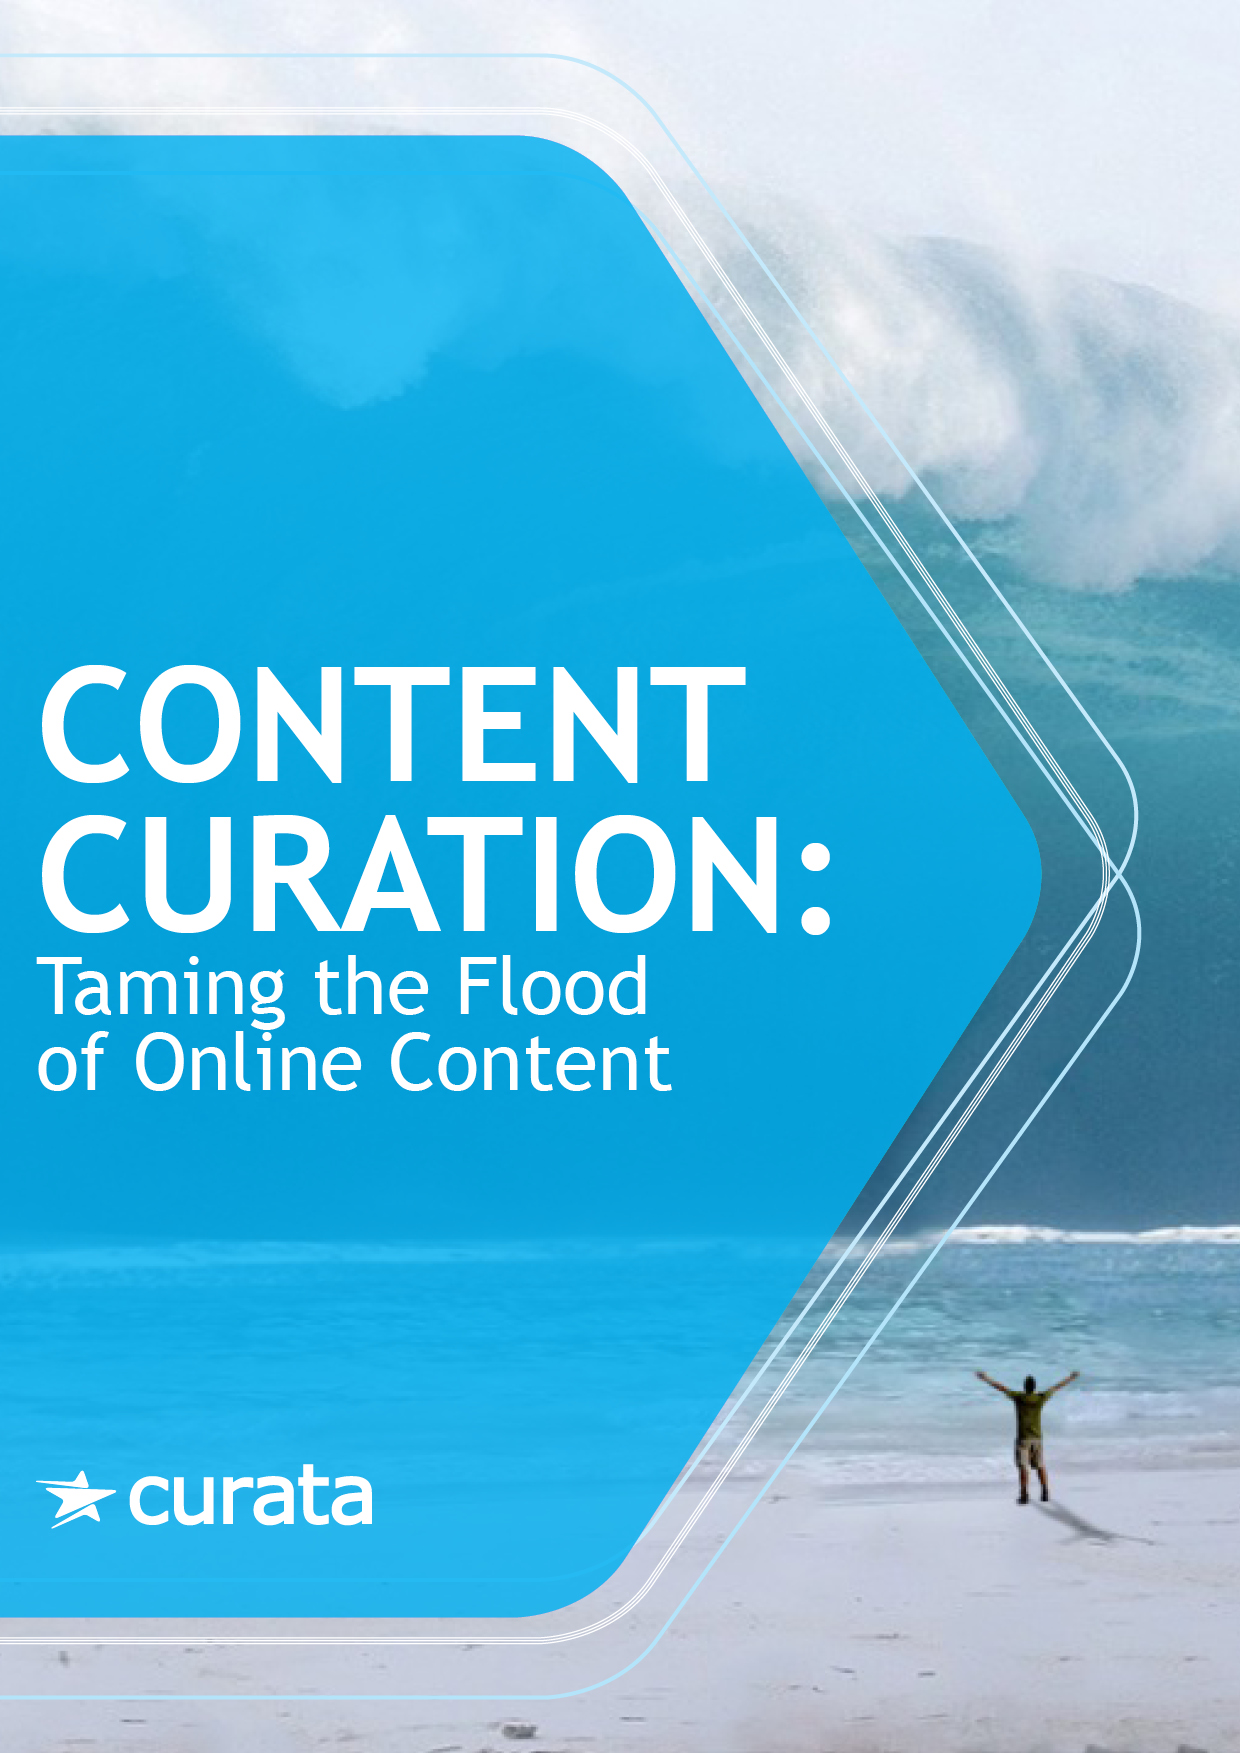 Content Curation - Taming the Flood of Online Content